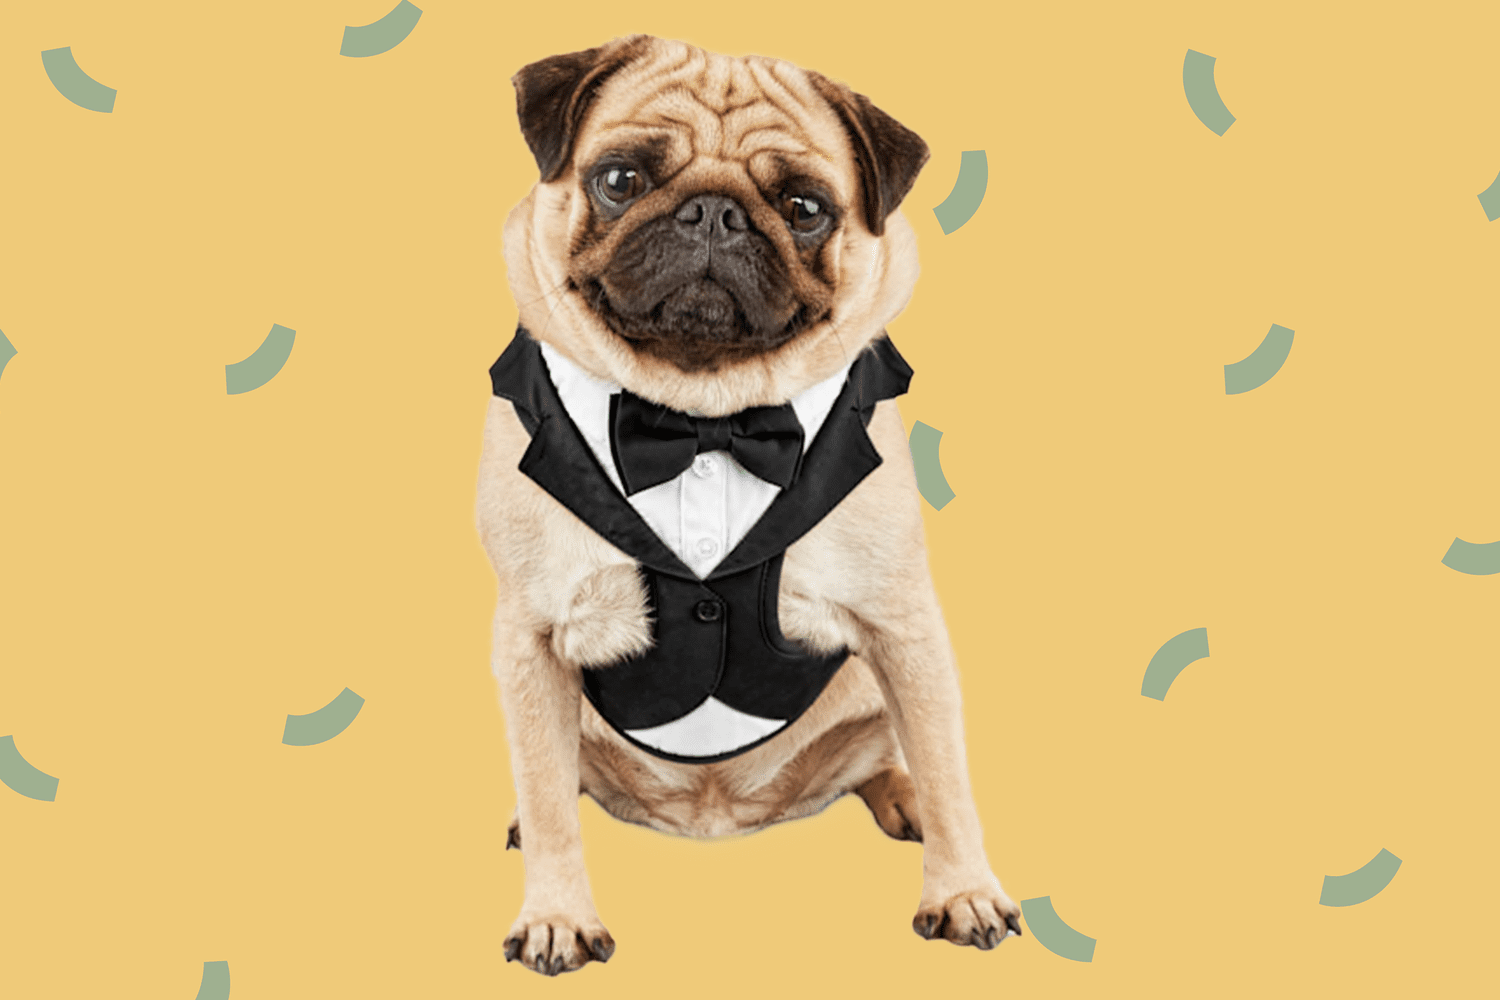 The Best Pet Wedding Attire for Your Furry Friend